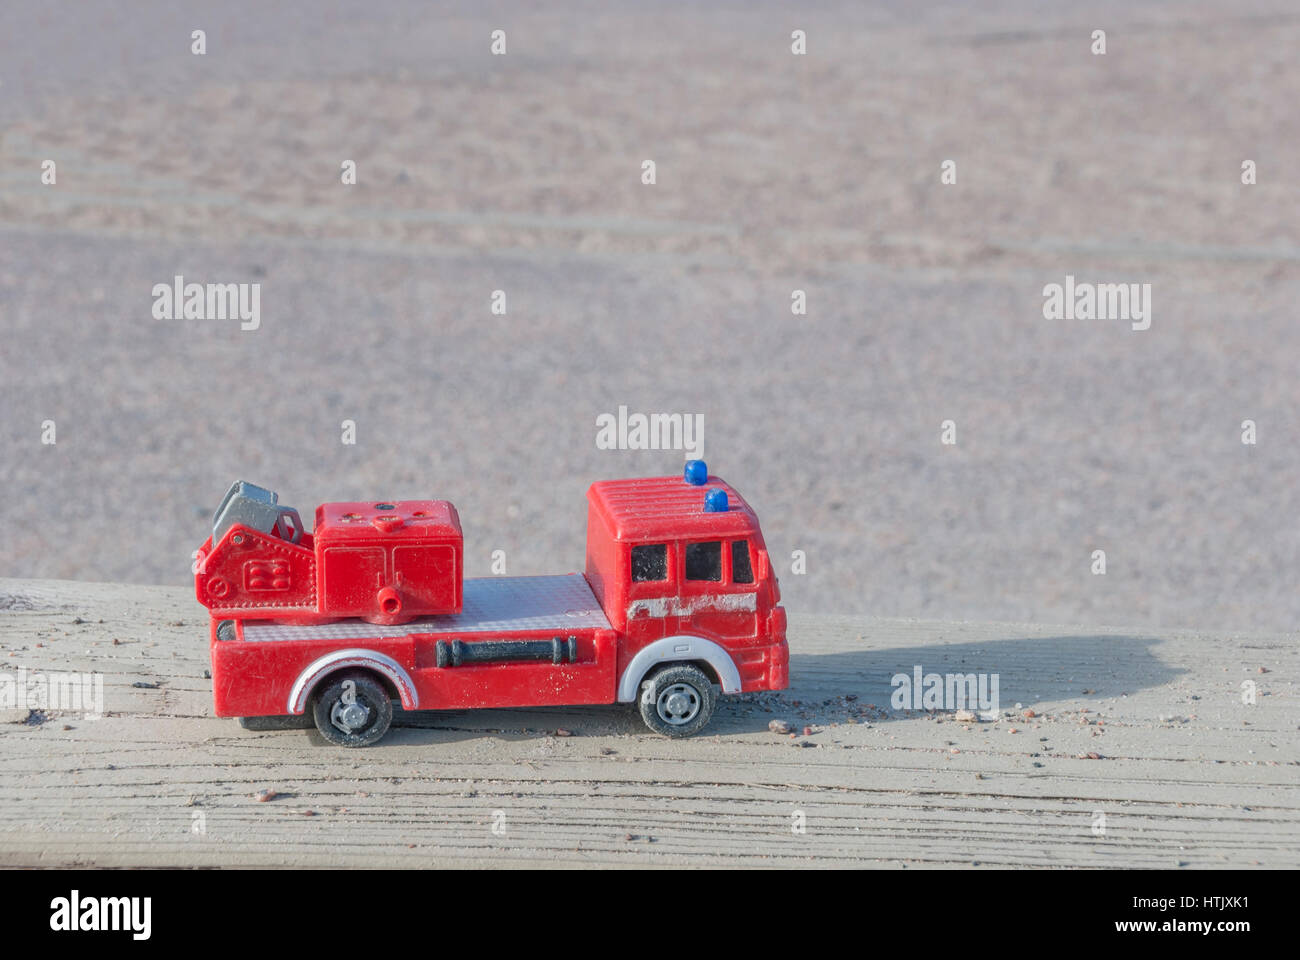 Toy fire truck background Stock Photo